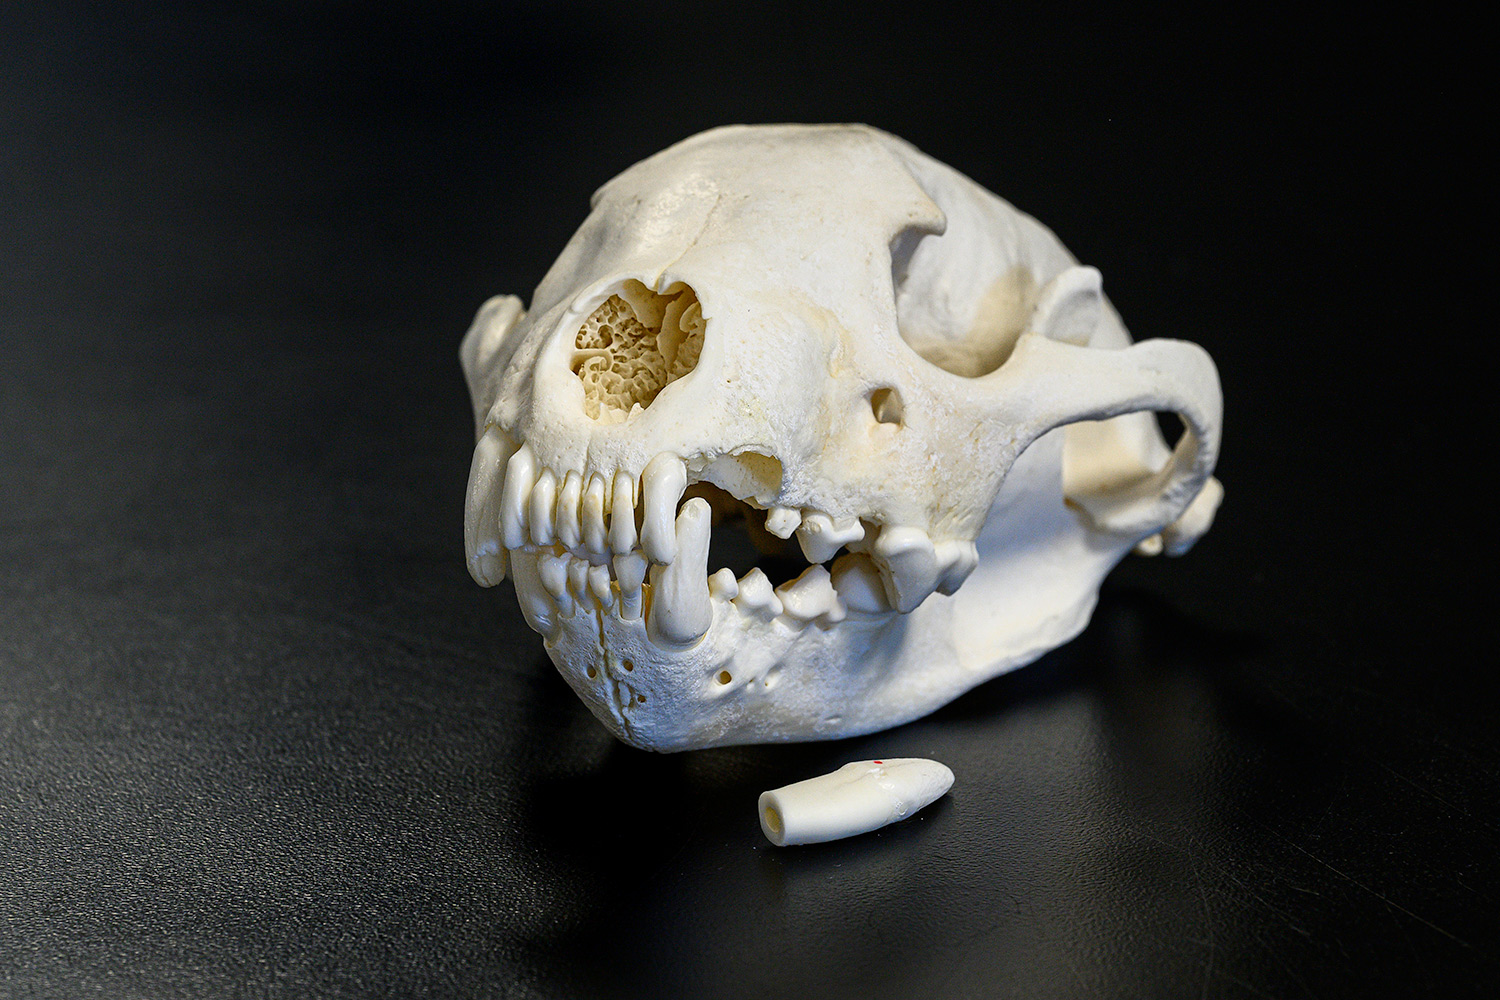 wolverine skull with one tooth removed